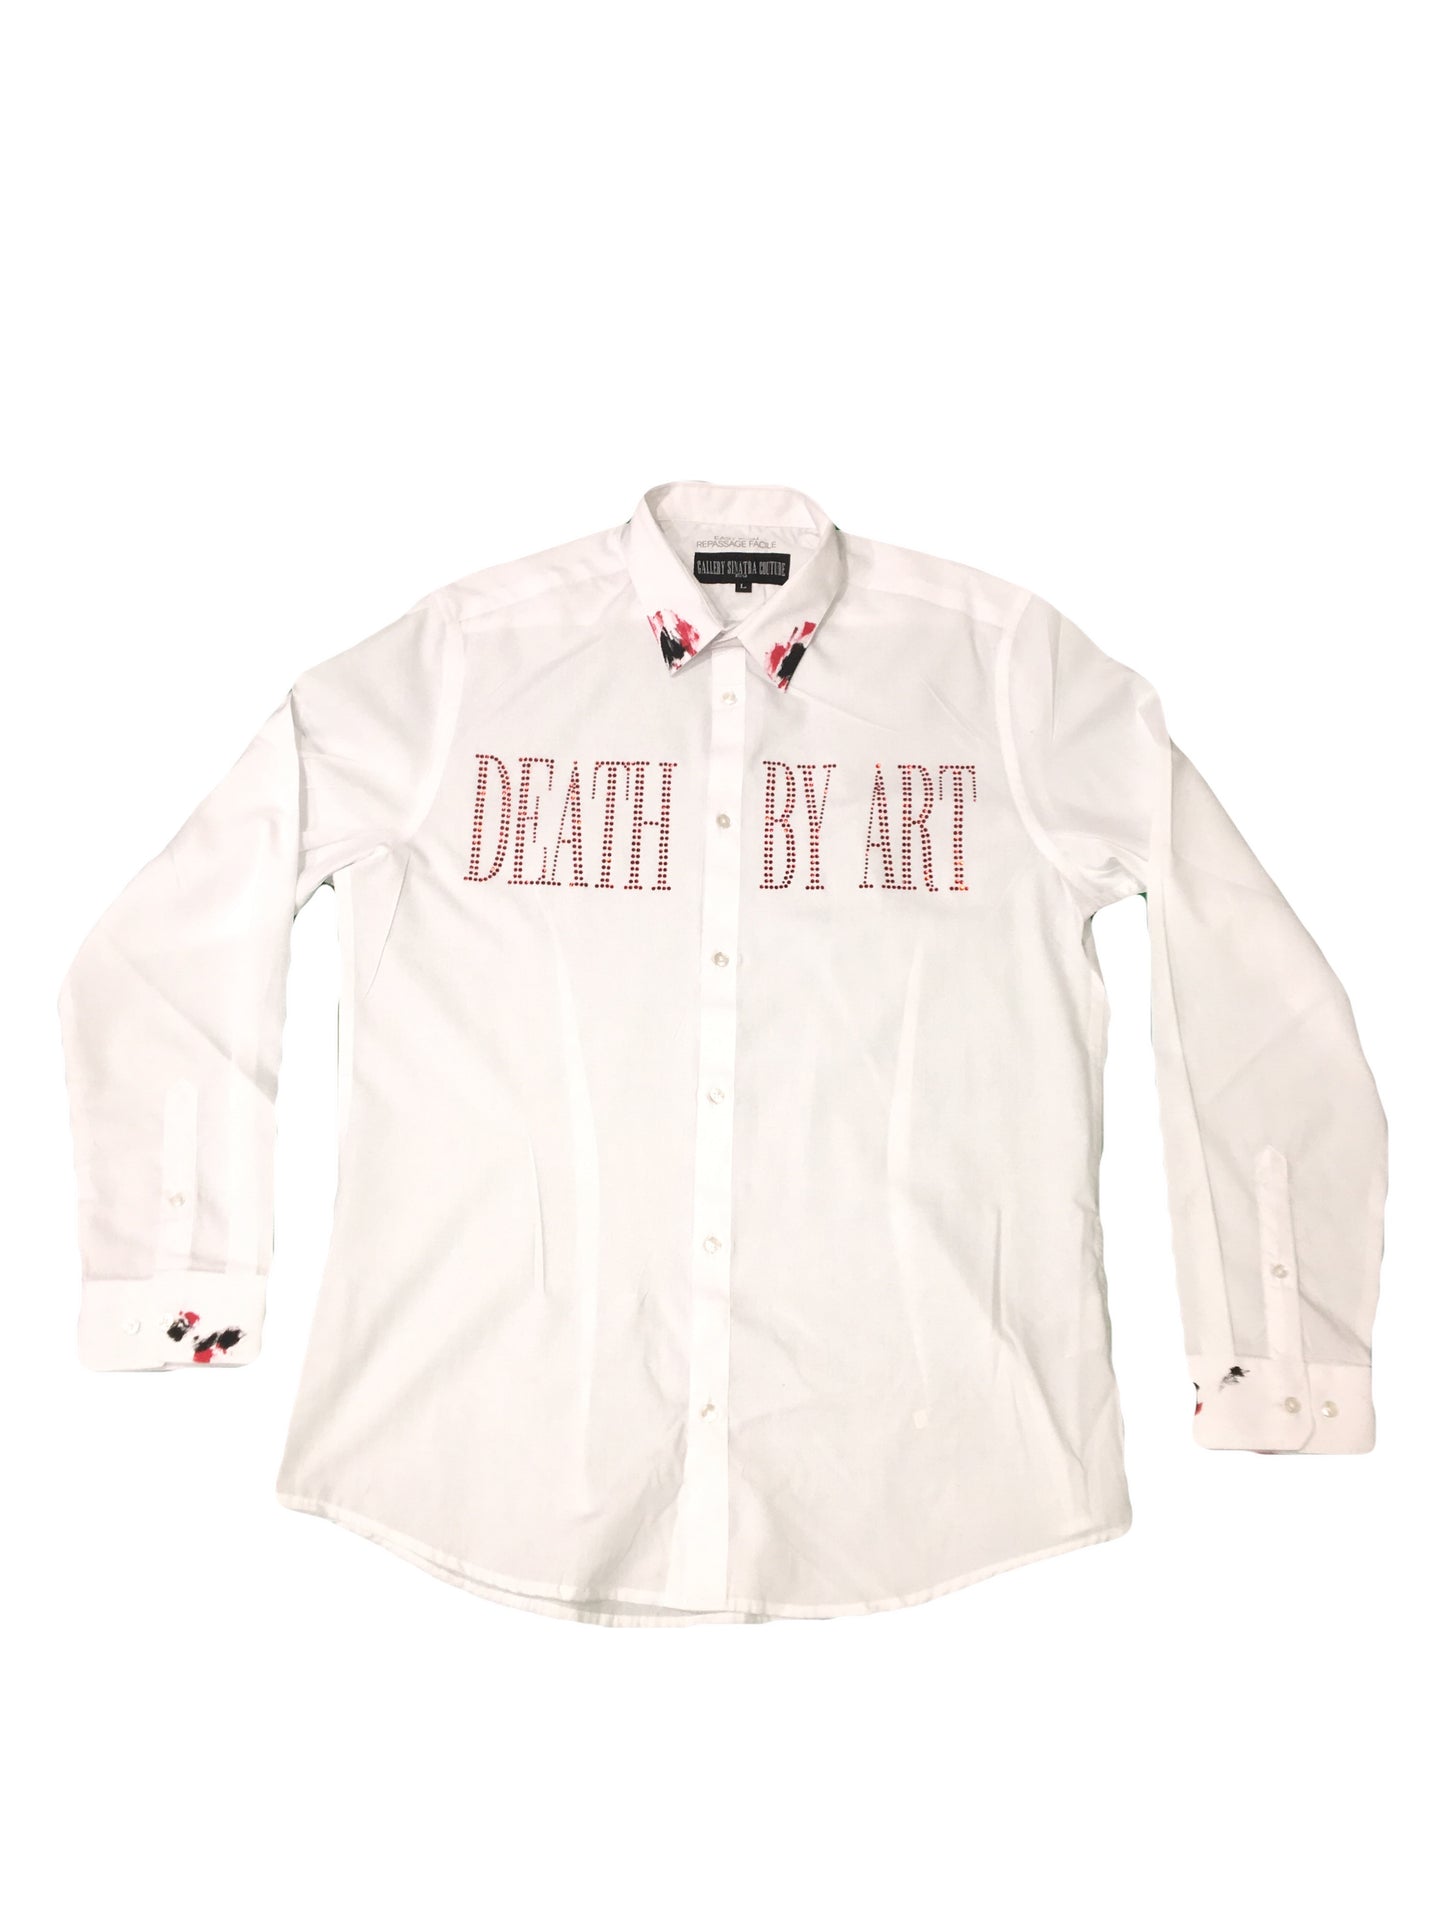 DBA Button Up White/Red